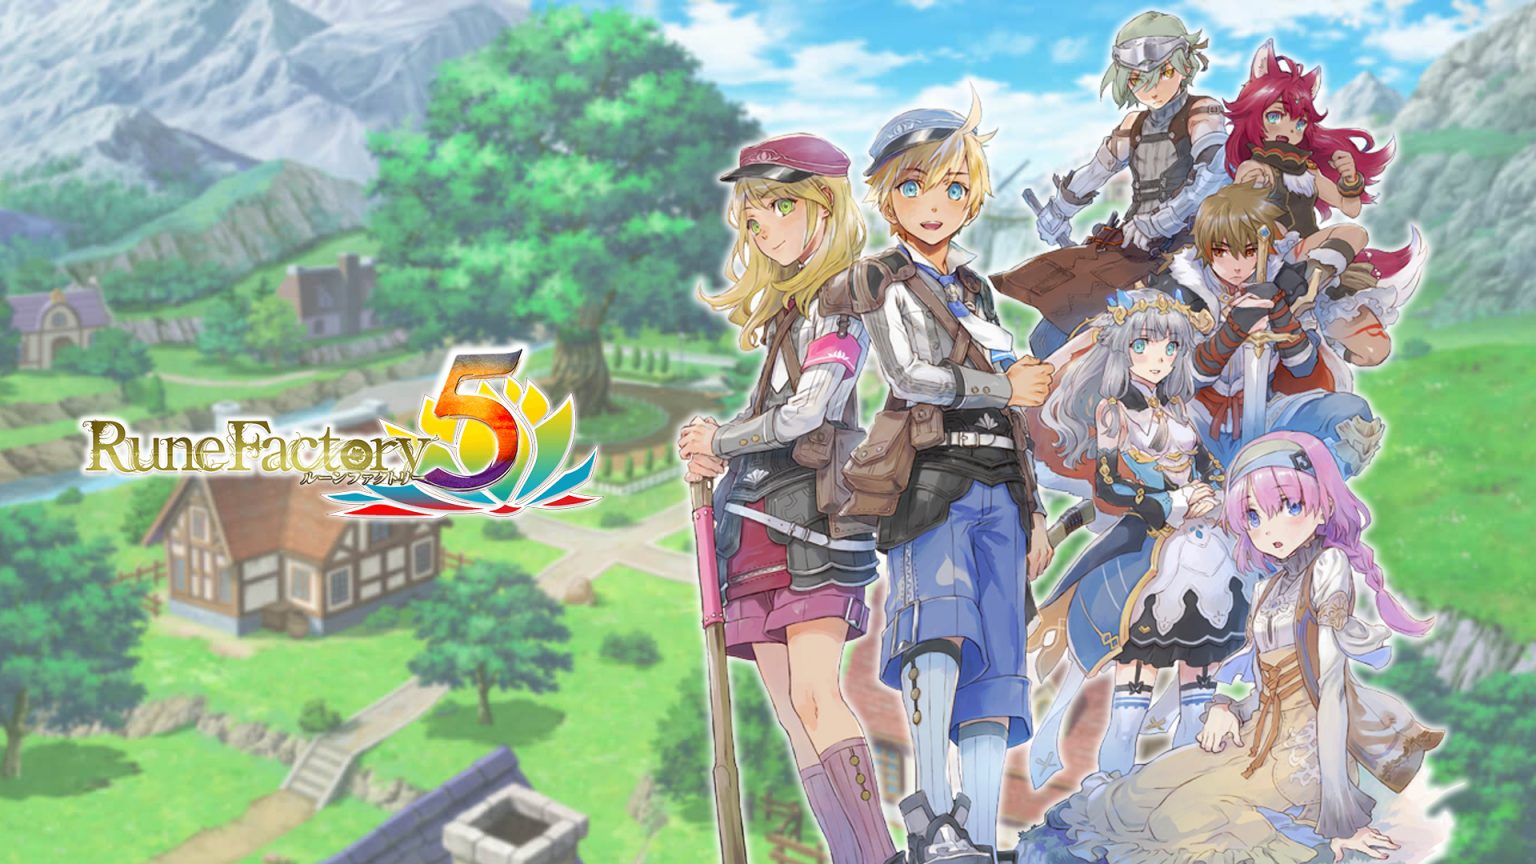 Rune Factory 5 Receives Gameplay Overview Trailer